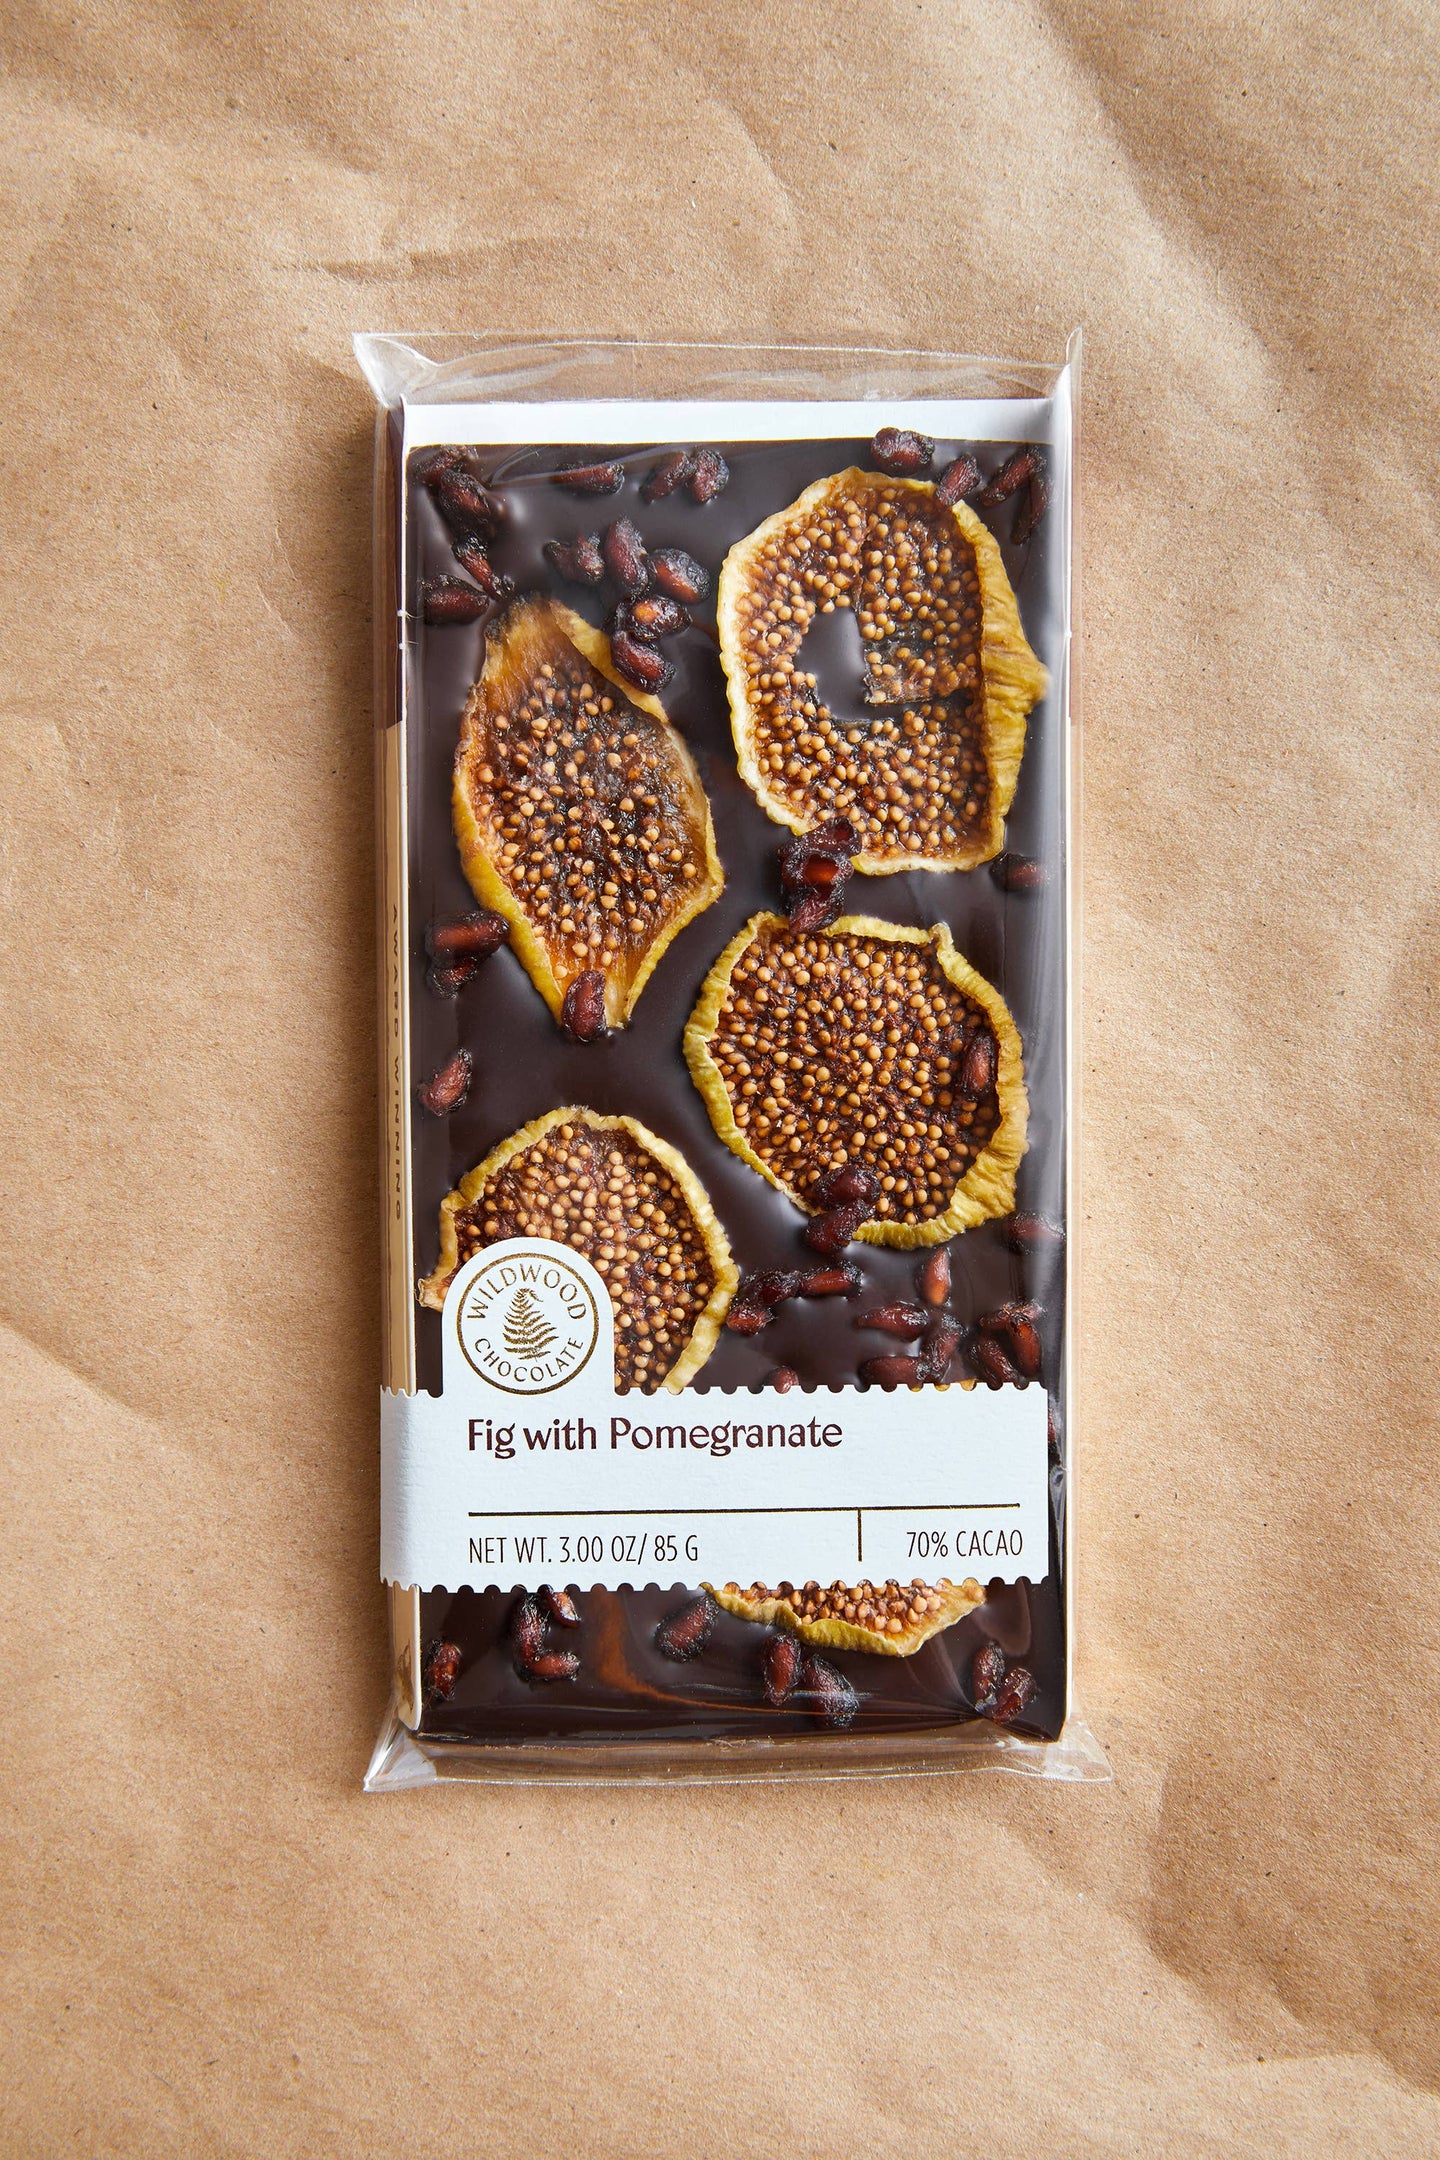 Wildwood Chocolate - Fig with Pomegranate - Limited Edition